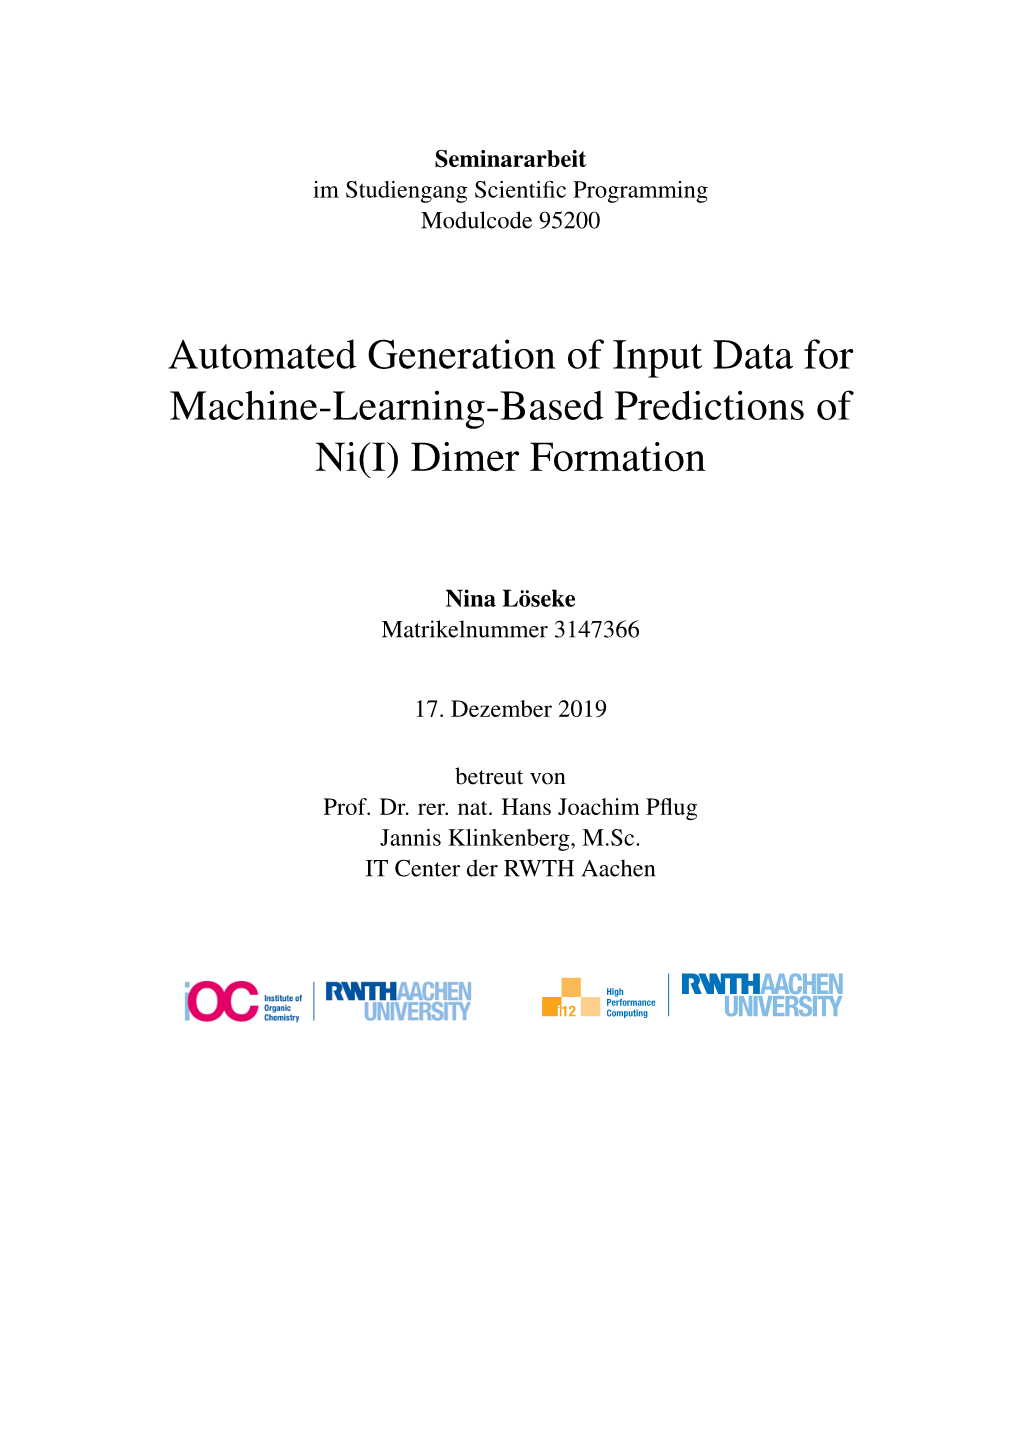 Automated Generation of Input Data for Machine-Learning-Based Predictions of Ni(I) Dimer Formation